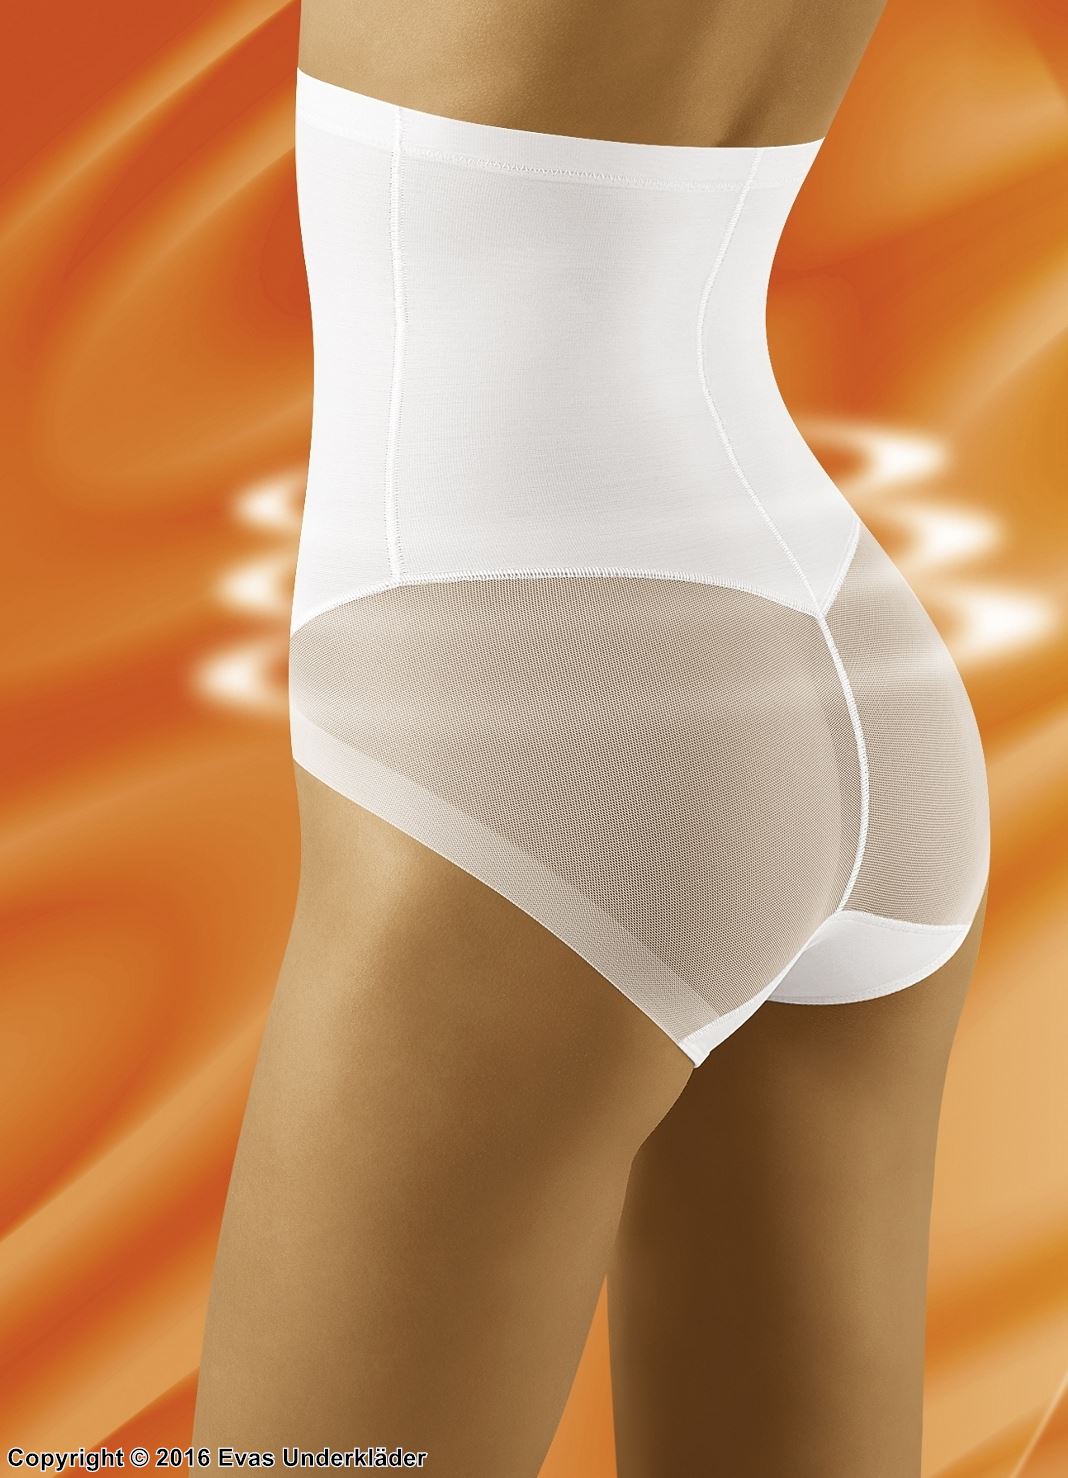 Shaping panties, net inlay, very high waist, anti-slip silicone band, invisible under clothes